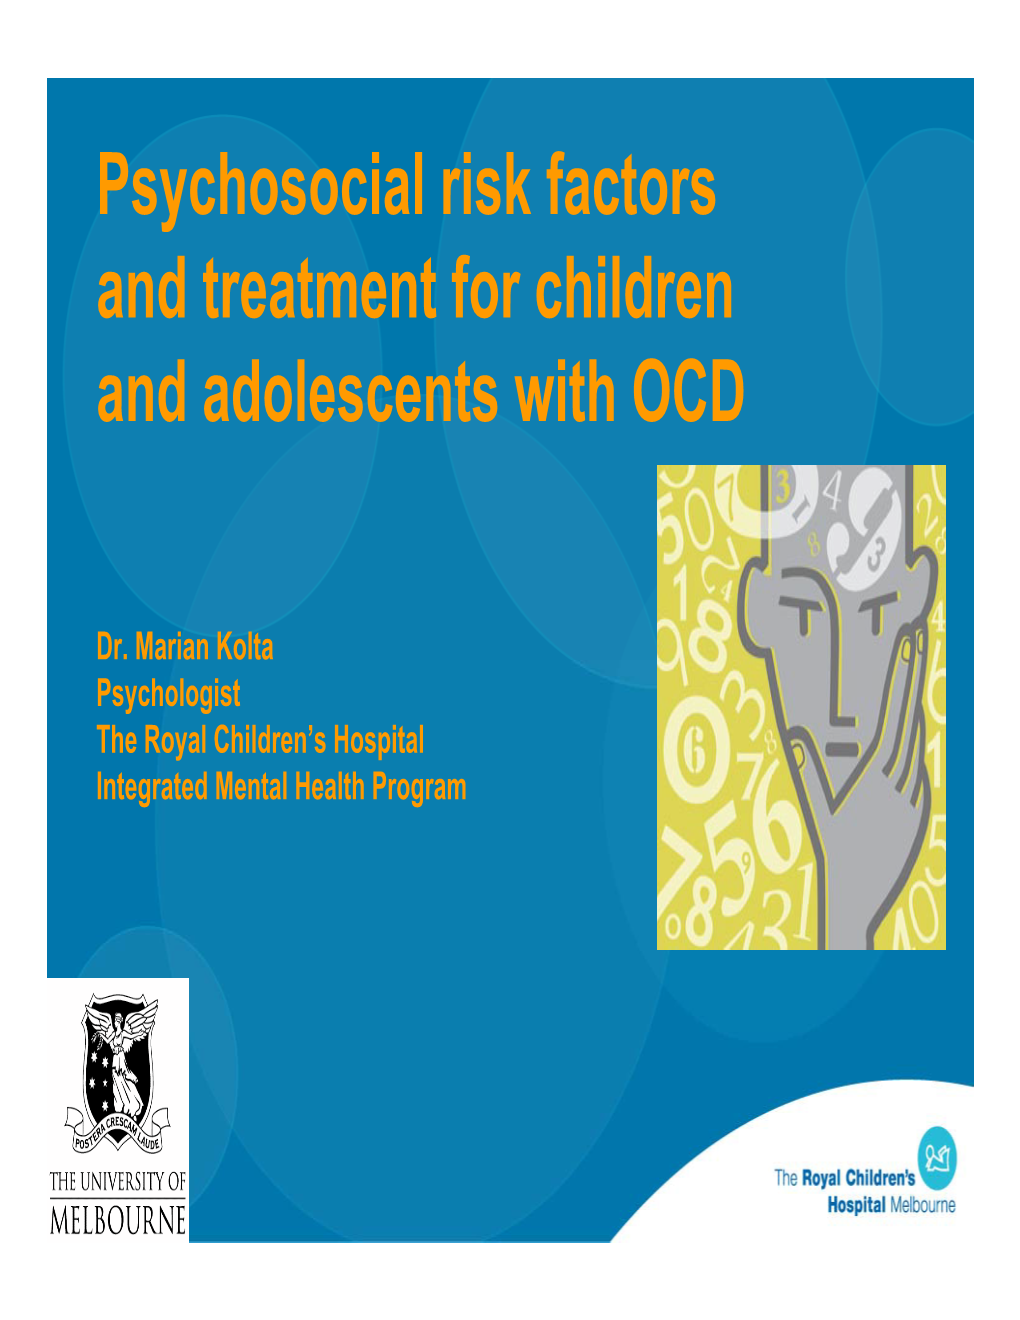 Psychosocial Risk Factors and Treatment for Children and Adolescents with OCD